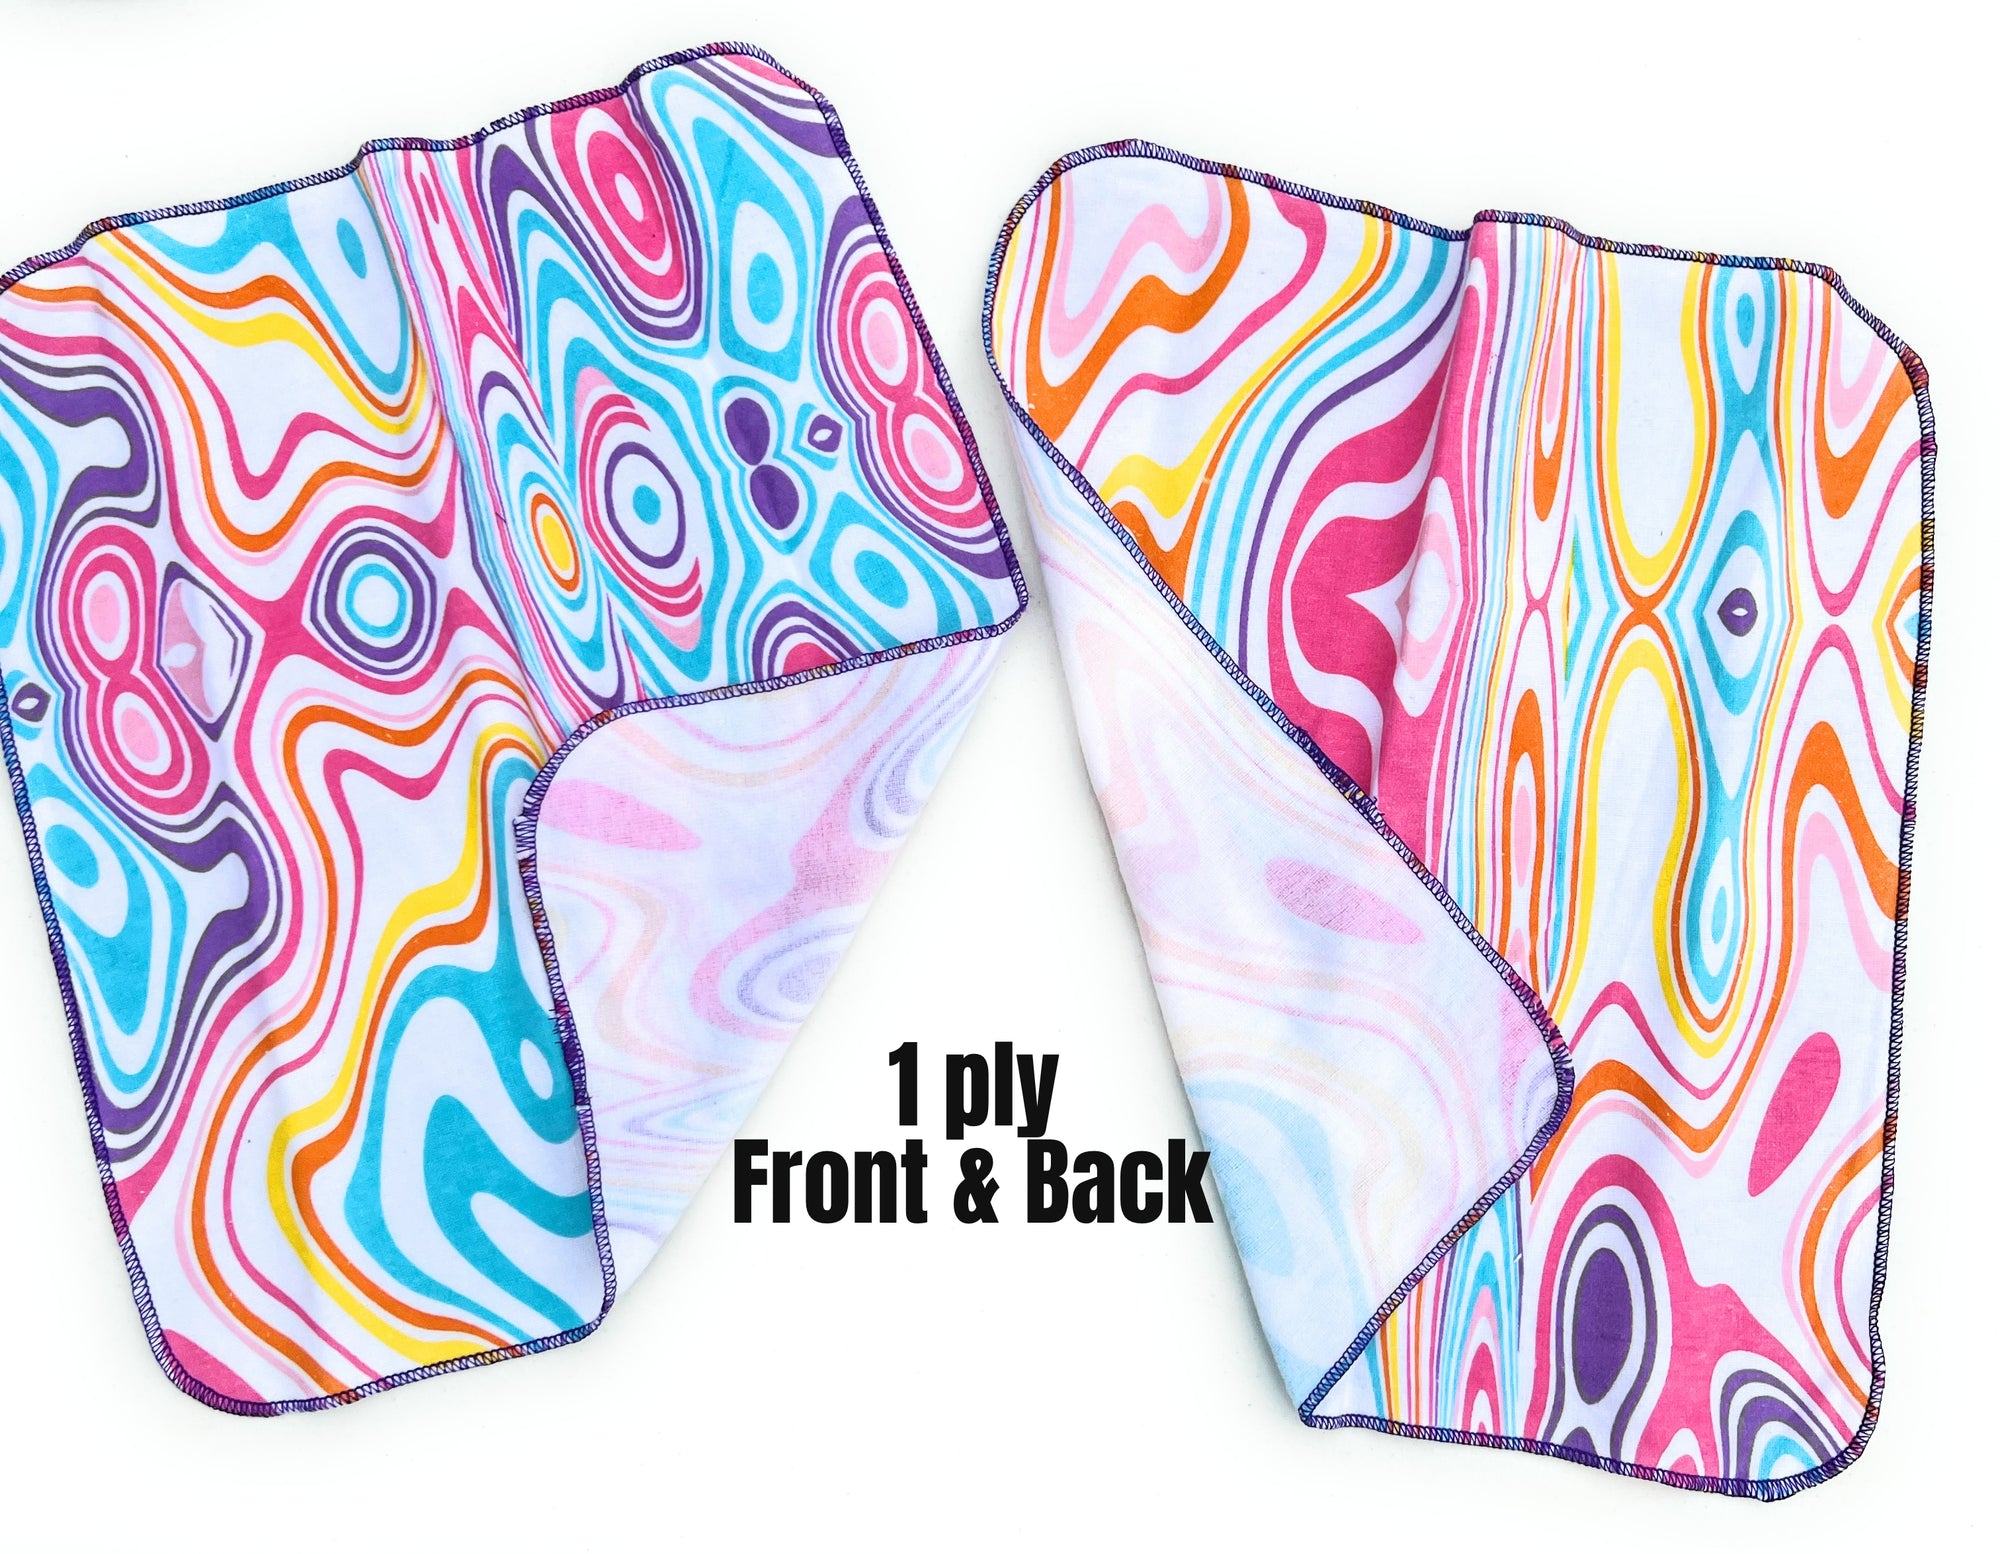 Non Paper Towels Napkins Wavy Psychedelic Large 10" x 12"  in a 6 pack